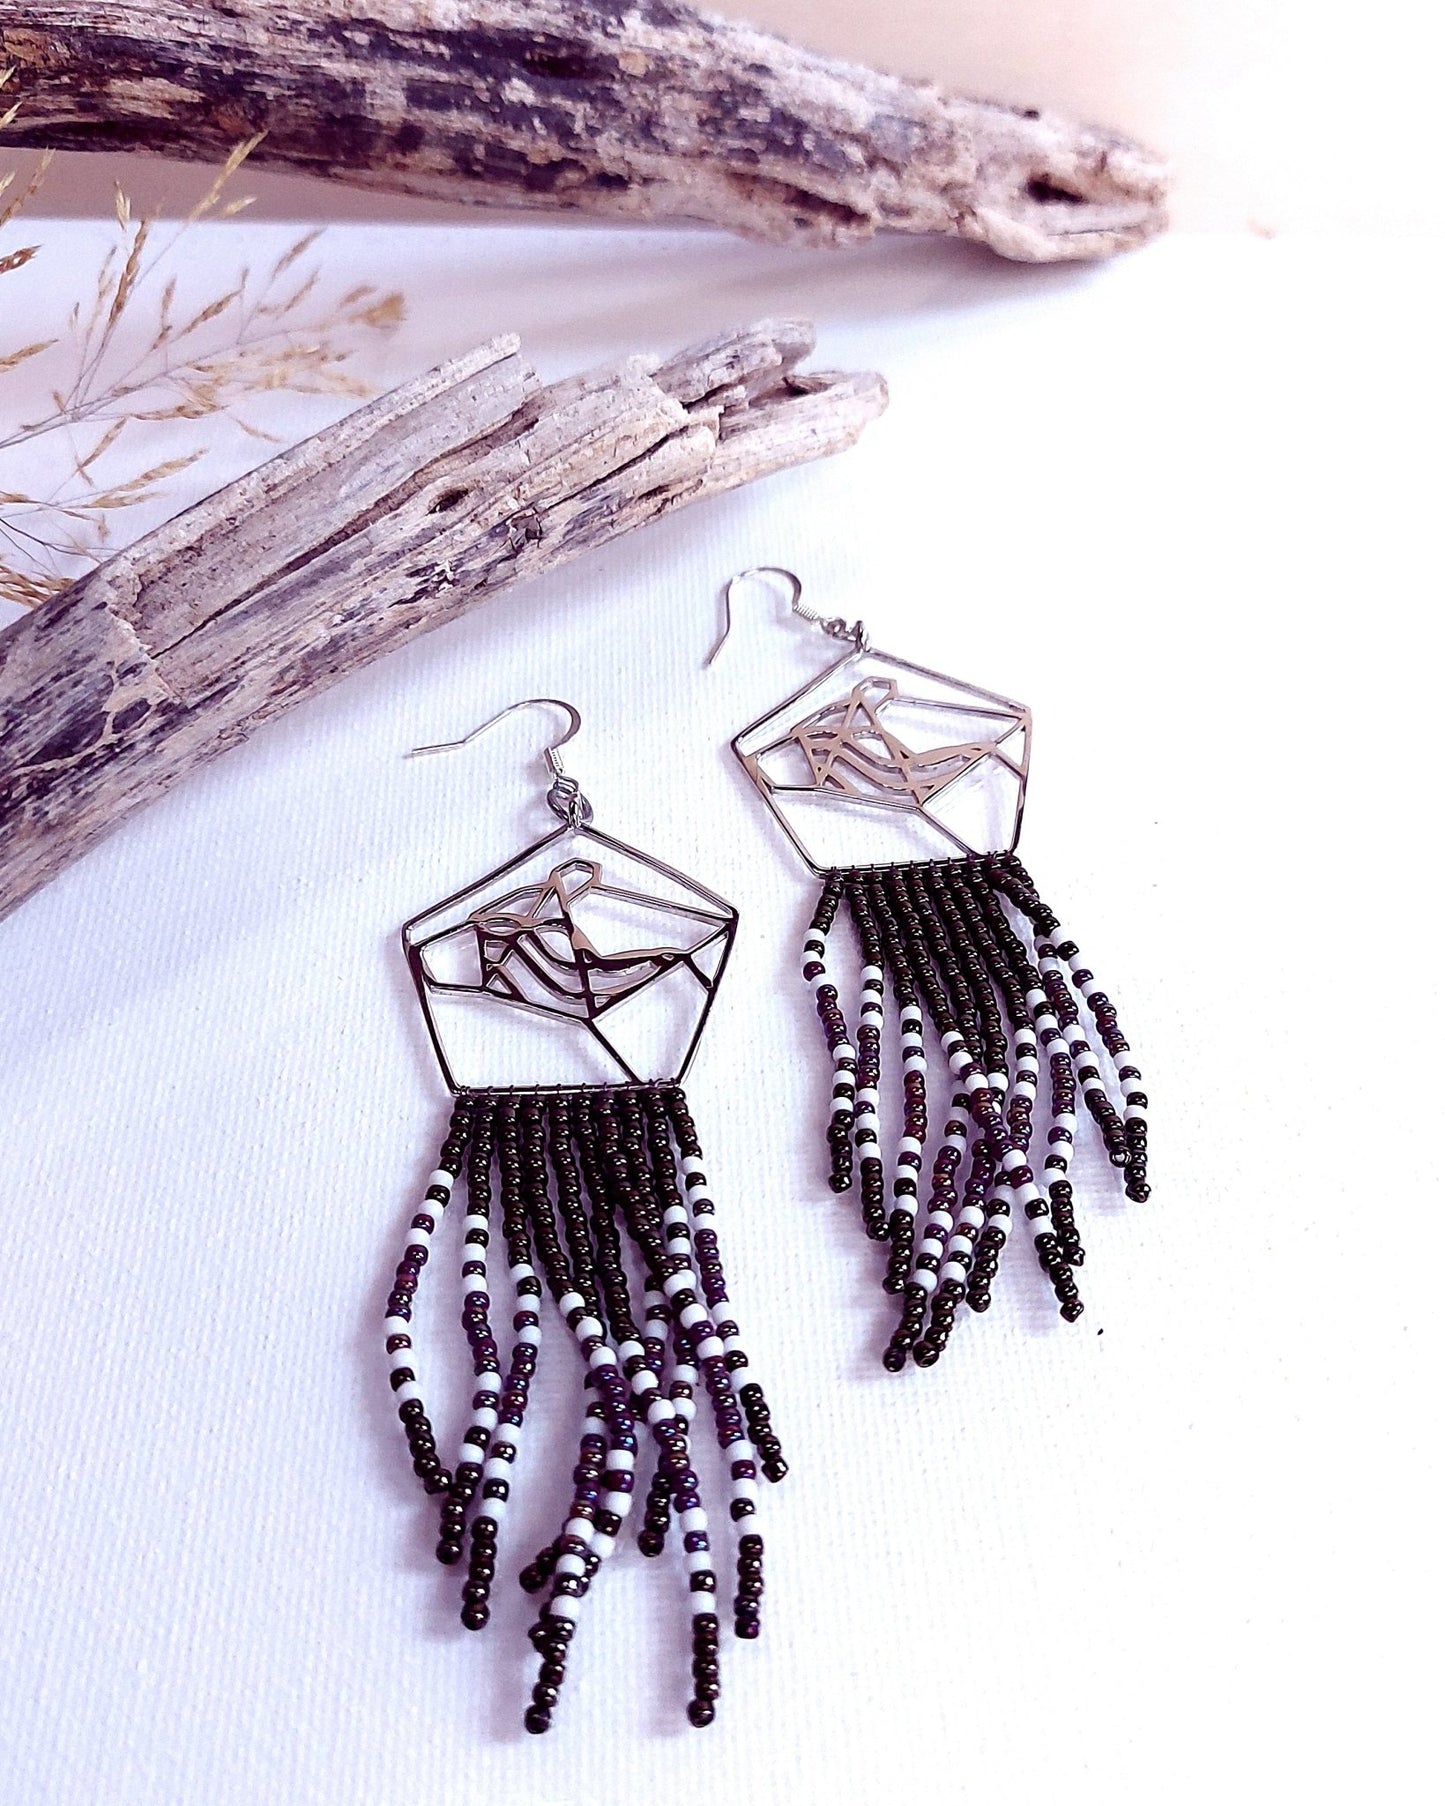 Collaborative art of metal smith and bead artist. Sterling Silver bear head earrings with black and white bead fringes